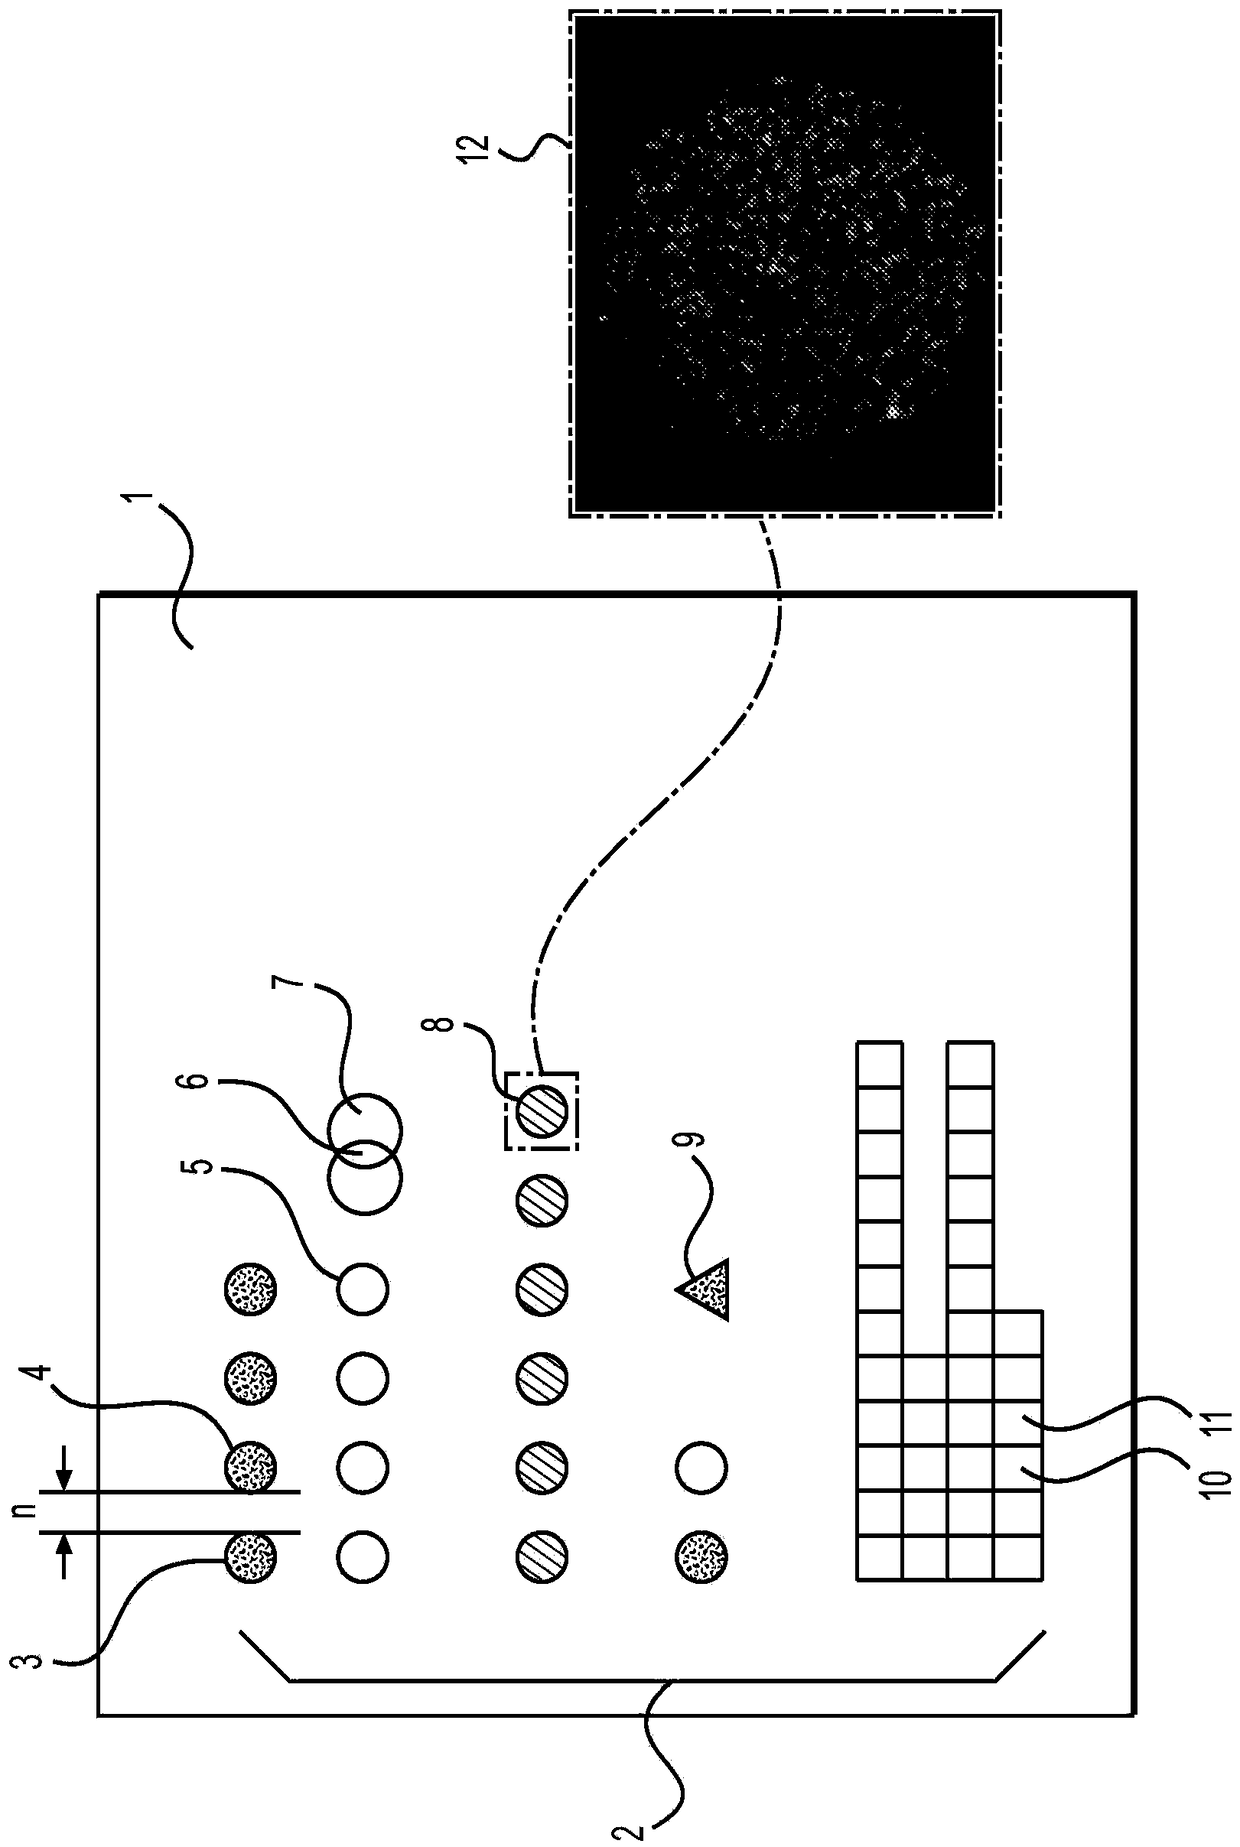 Arrays for single molecule detection and uses thereof